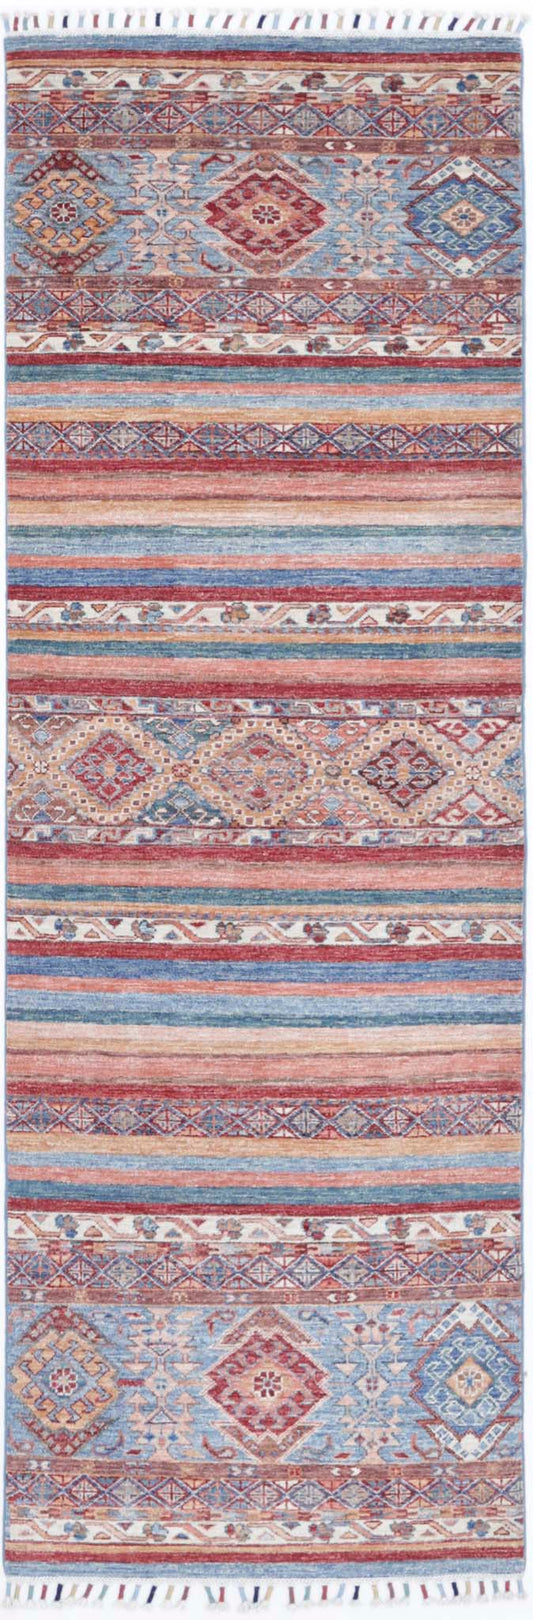 Hand Knotted Khurjeen Wool Rug - 2'6'' x 8'2''